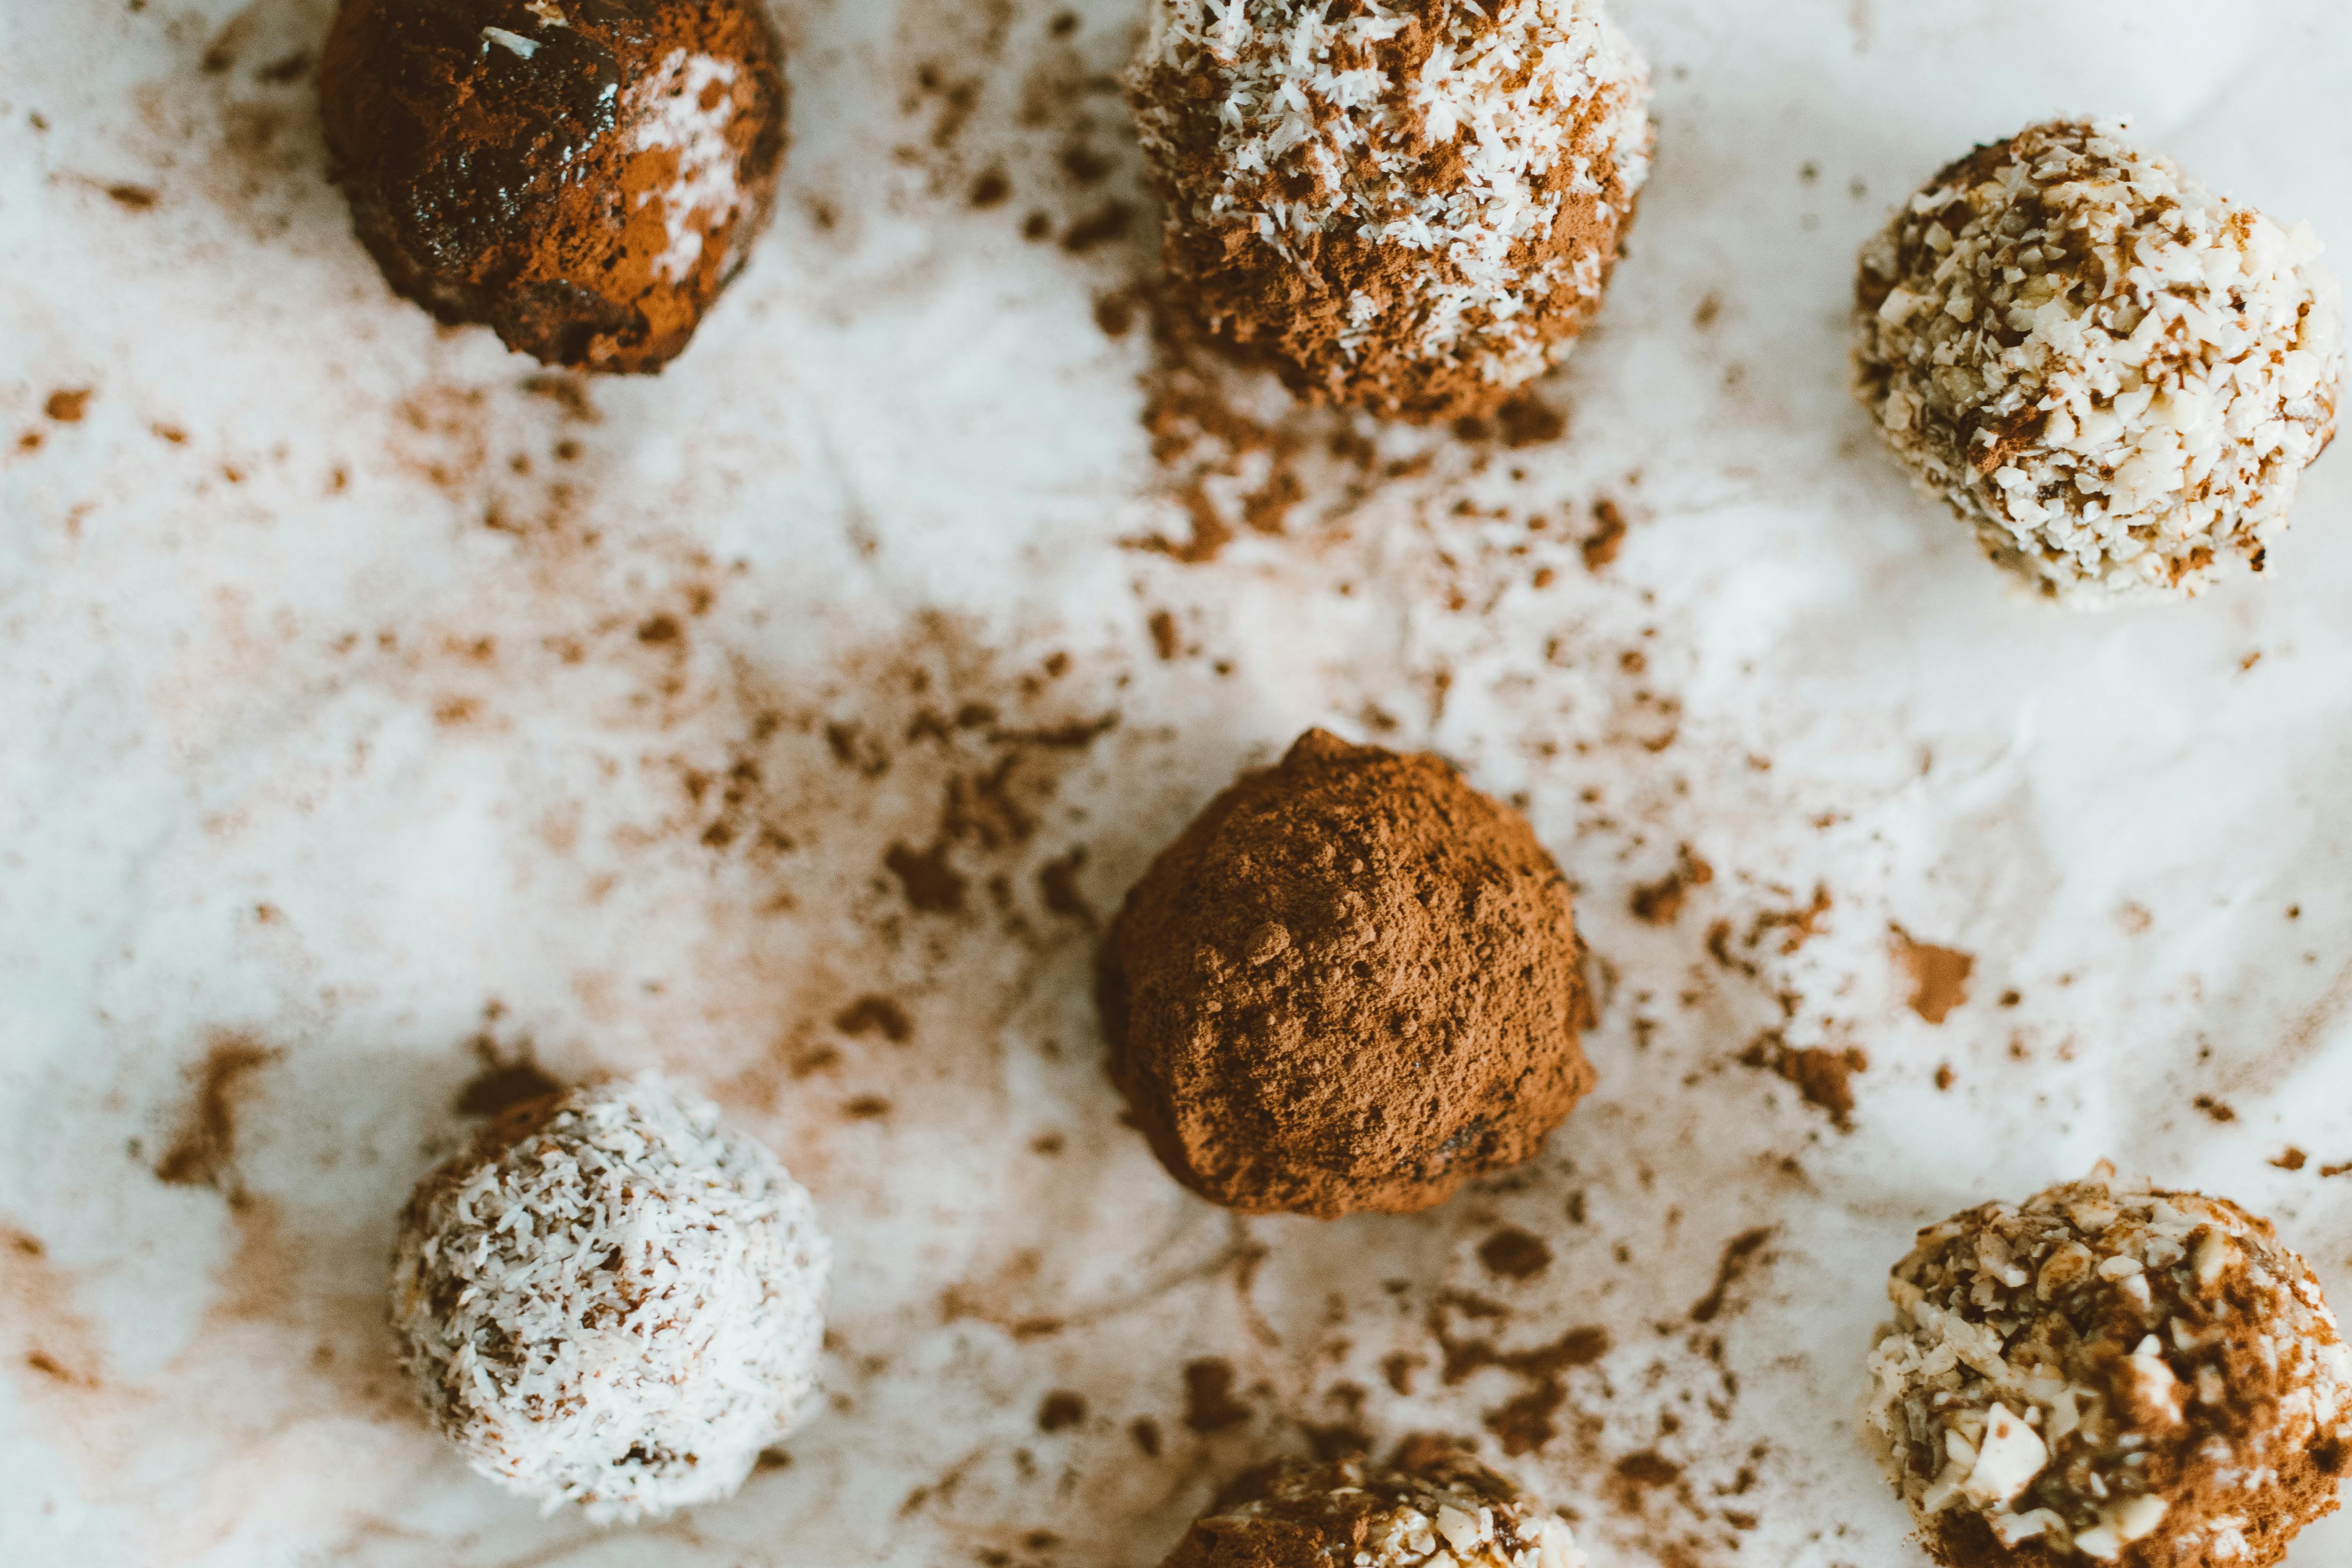 Filled Chocolate and Truffle Workshop – 16 July